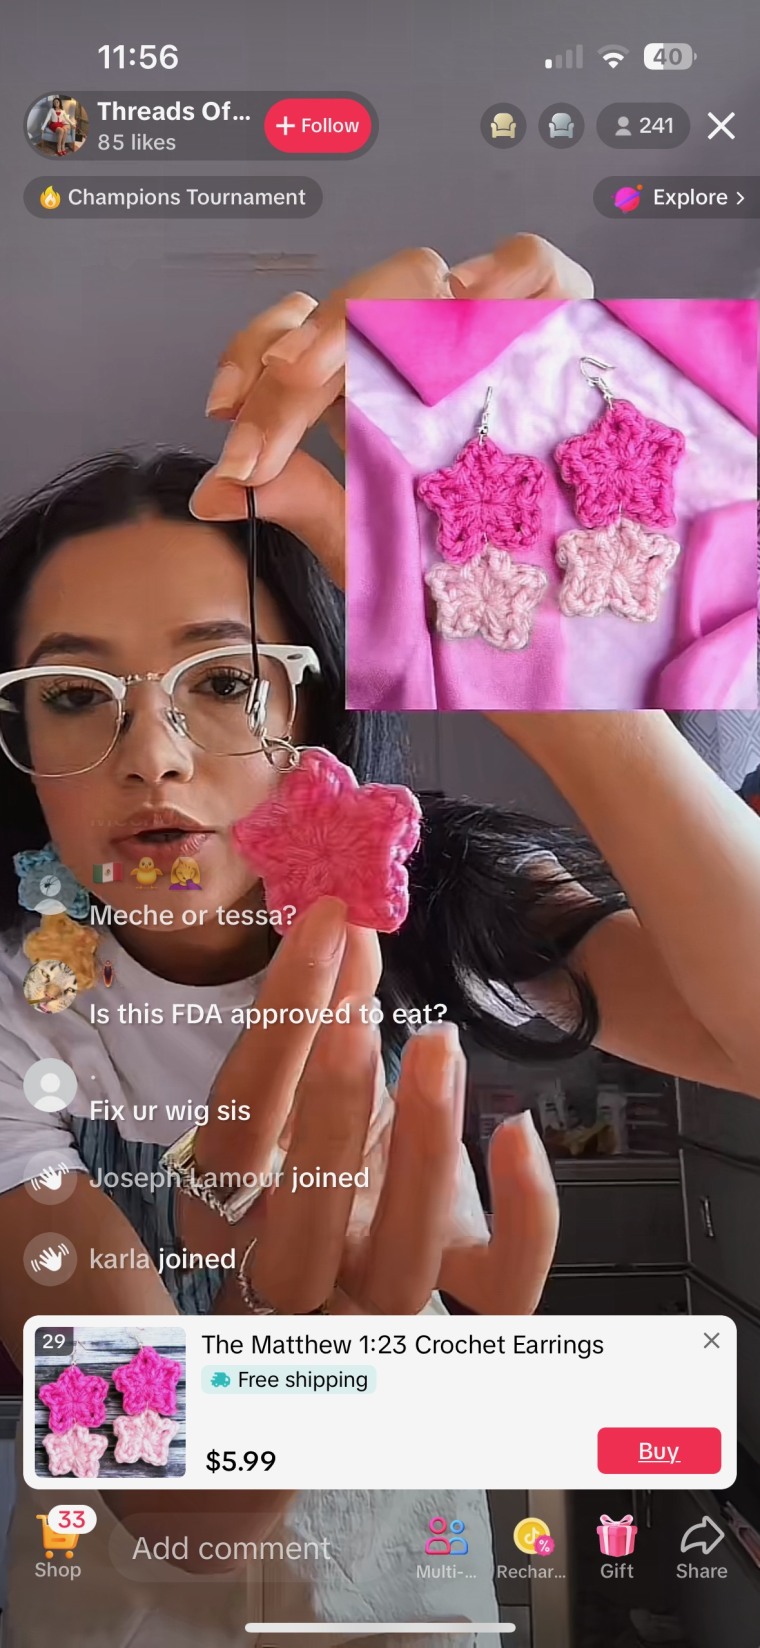 TikTok Live now includes a Shop feature for some accounts.